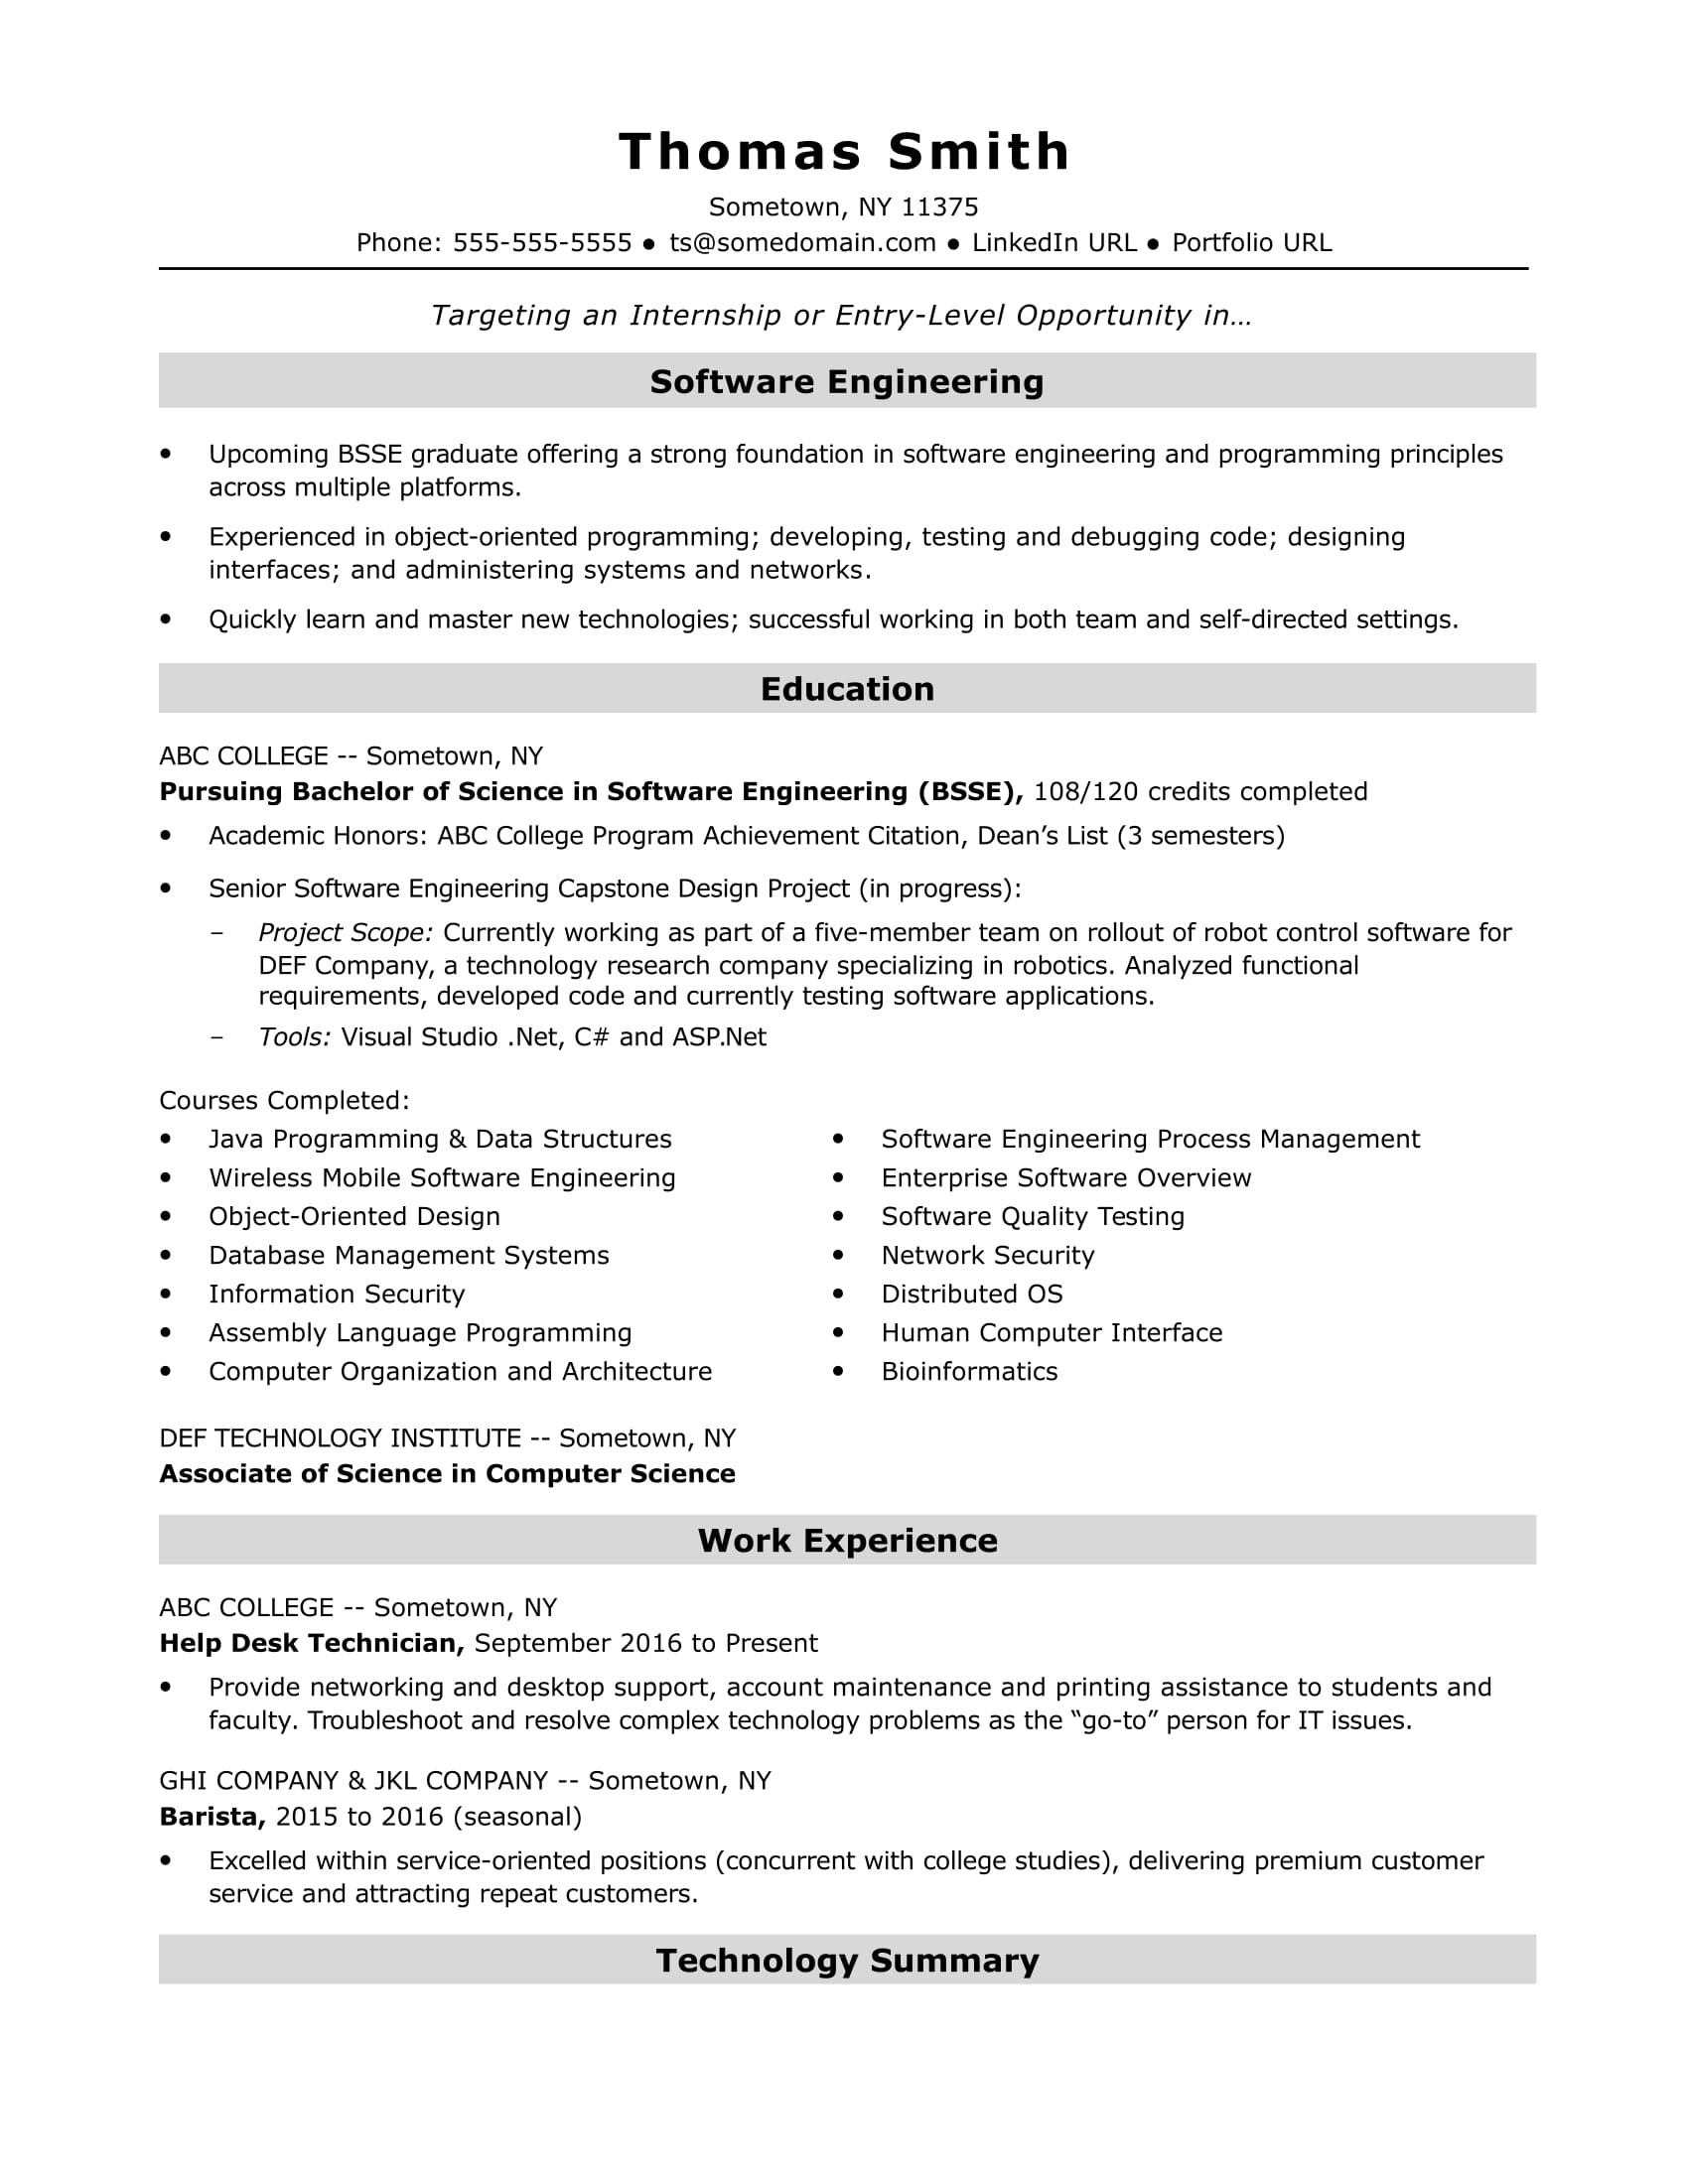 Software Engineer Experience Resume format Sample Entry-level software Engineer Resume Sample Monster.com